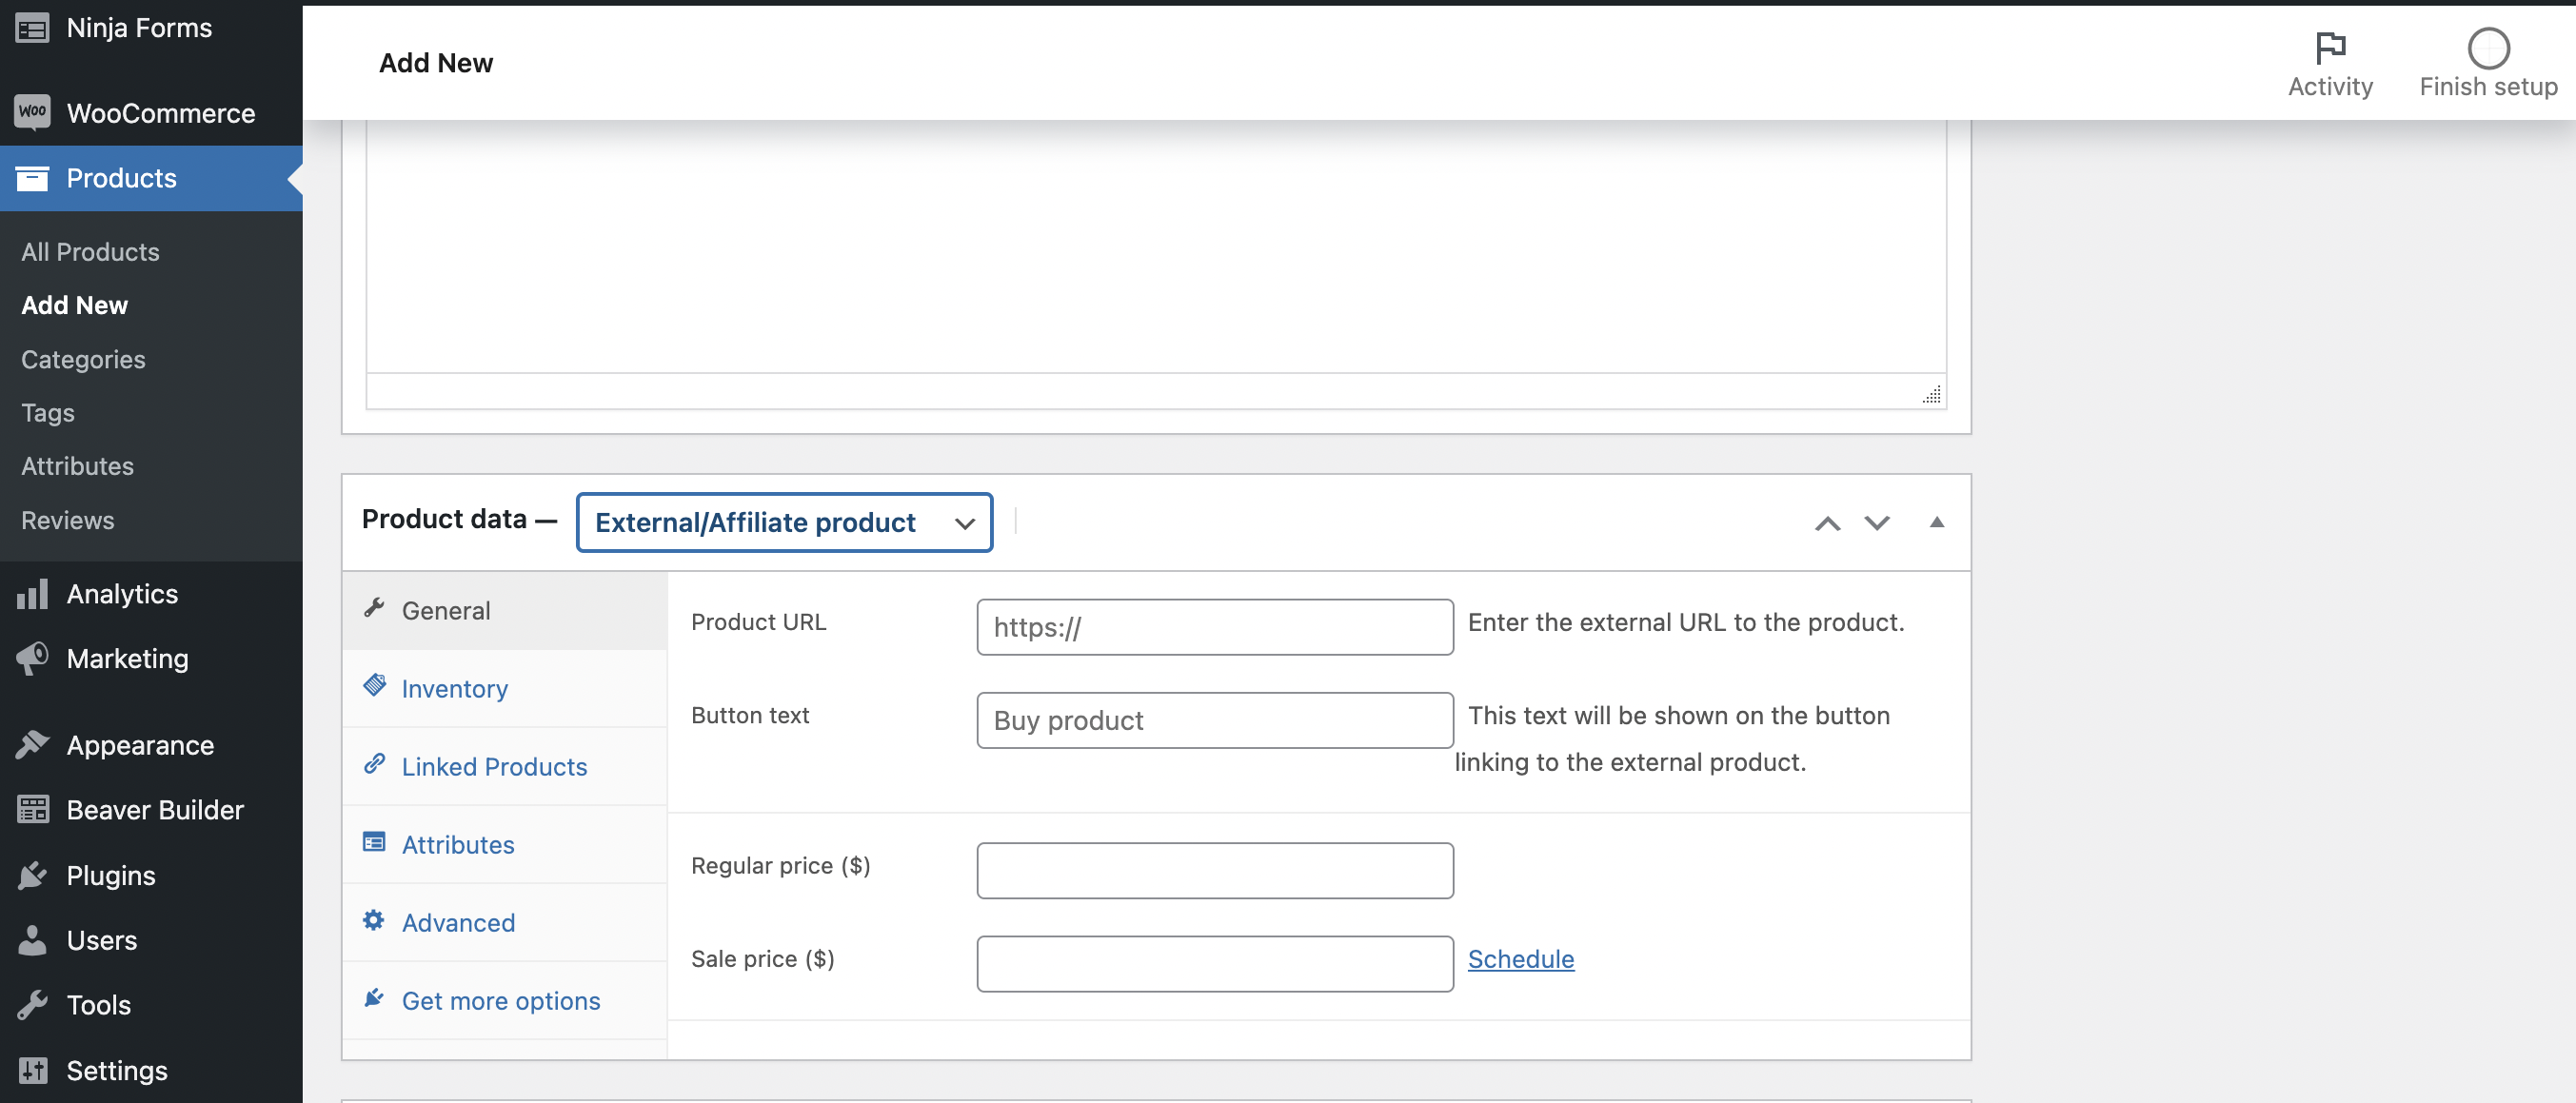 How to add affiliate products WooCommerce store STEP 2: select External/Affiliate Product 